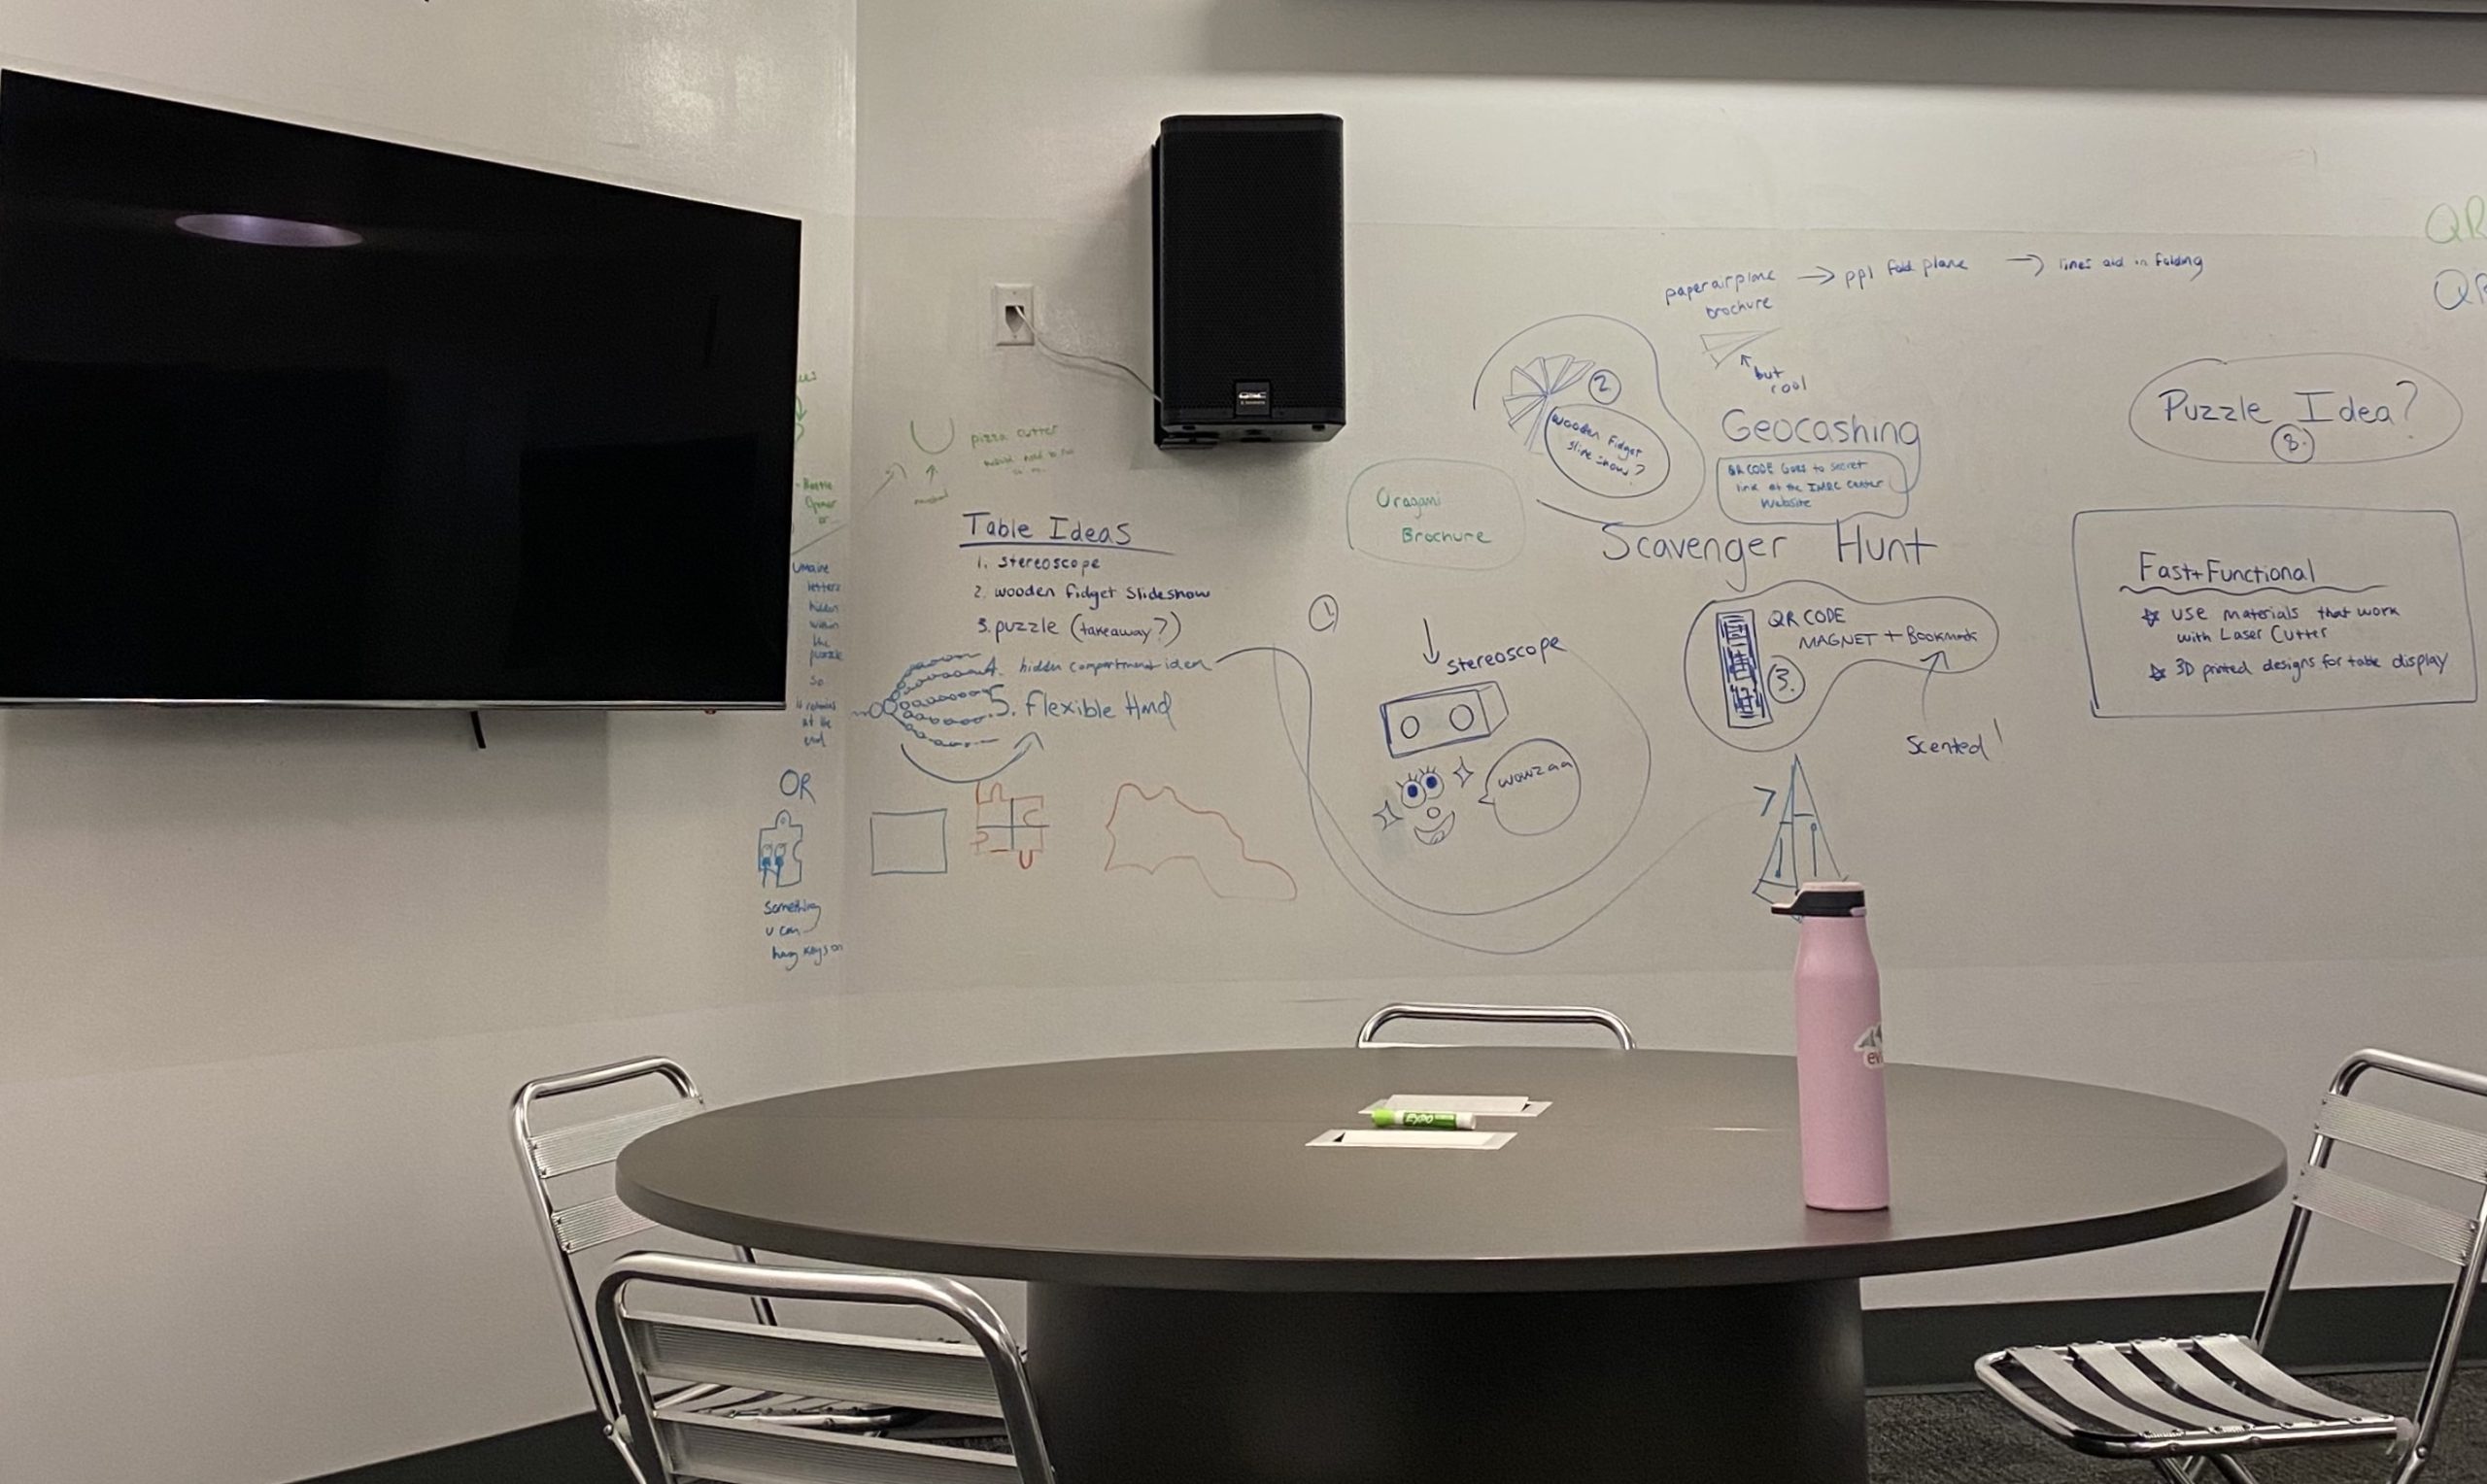 Whiteboard and TV with table and blue whiteboard marker notes slightly out of focus